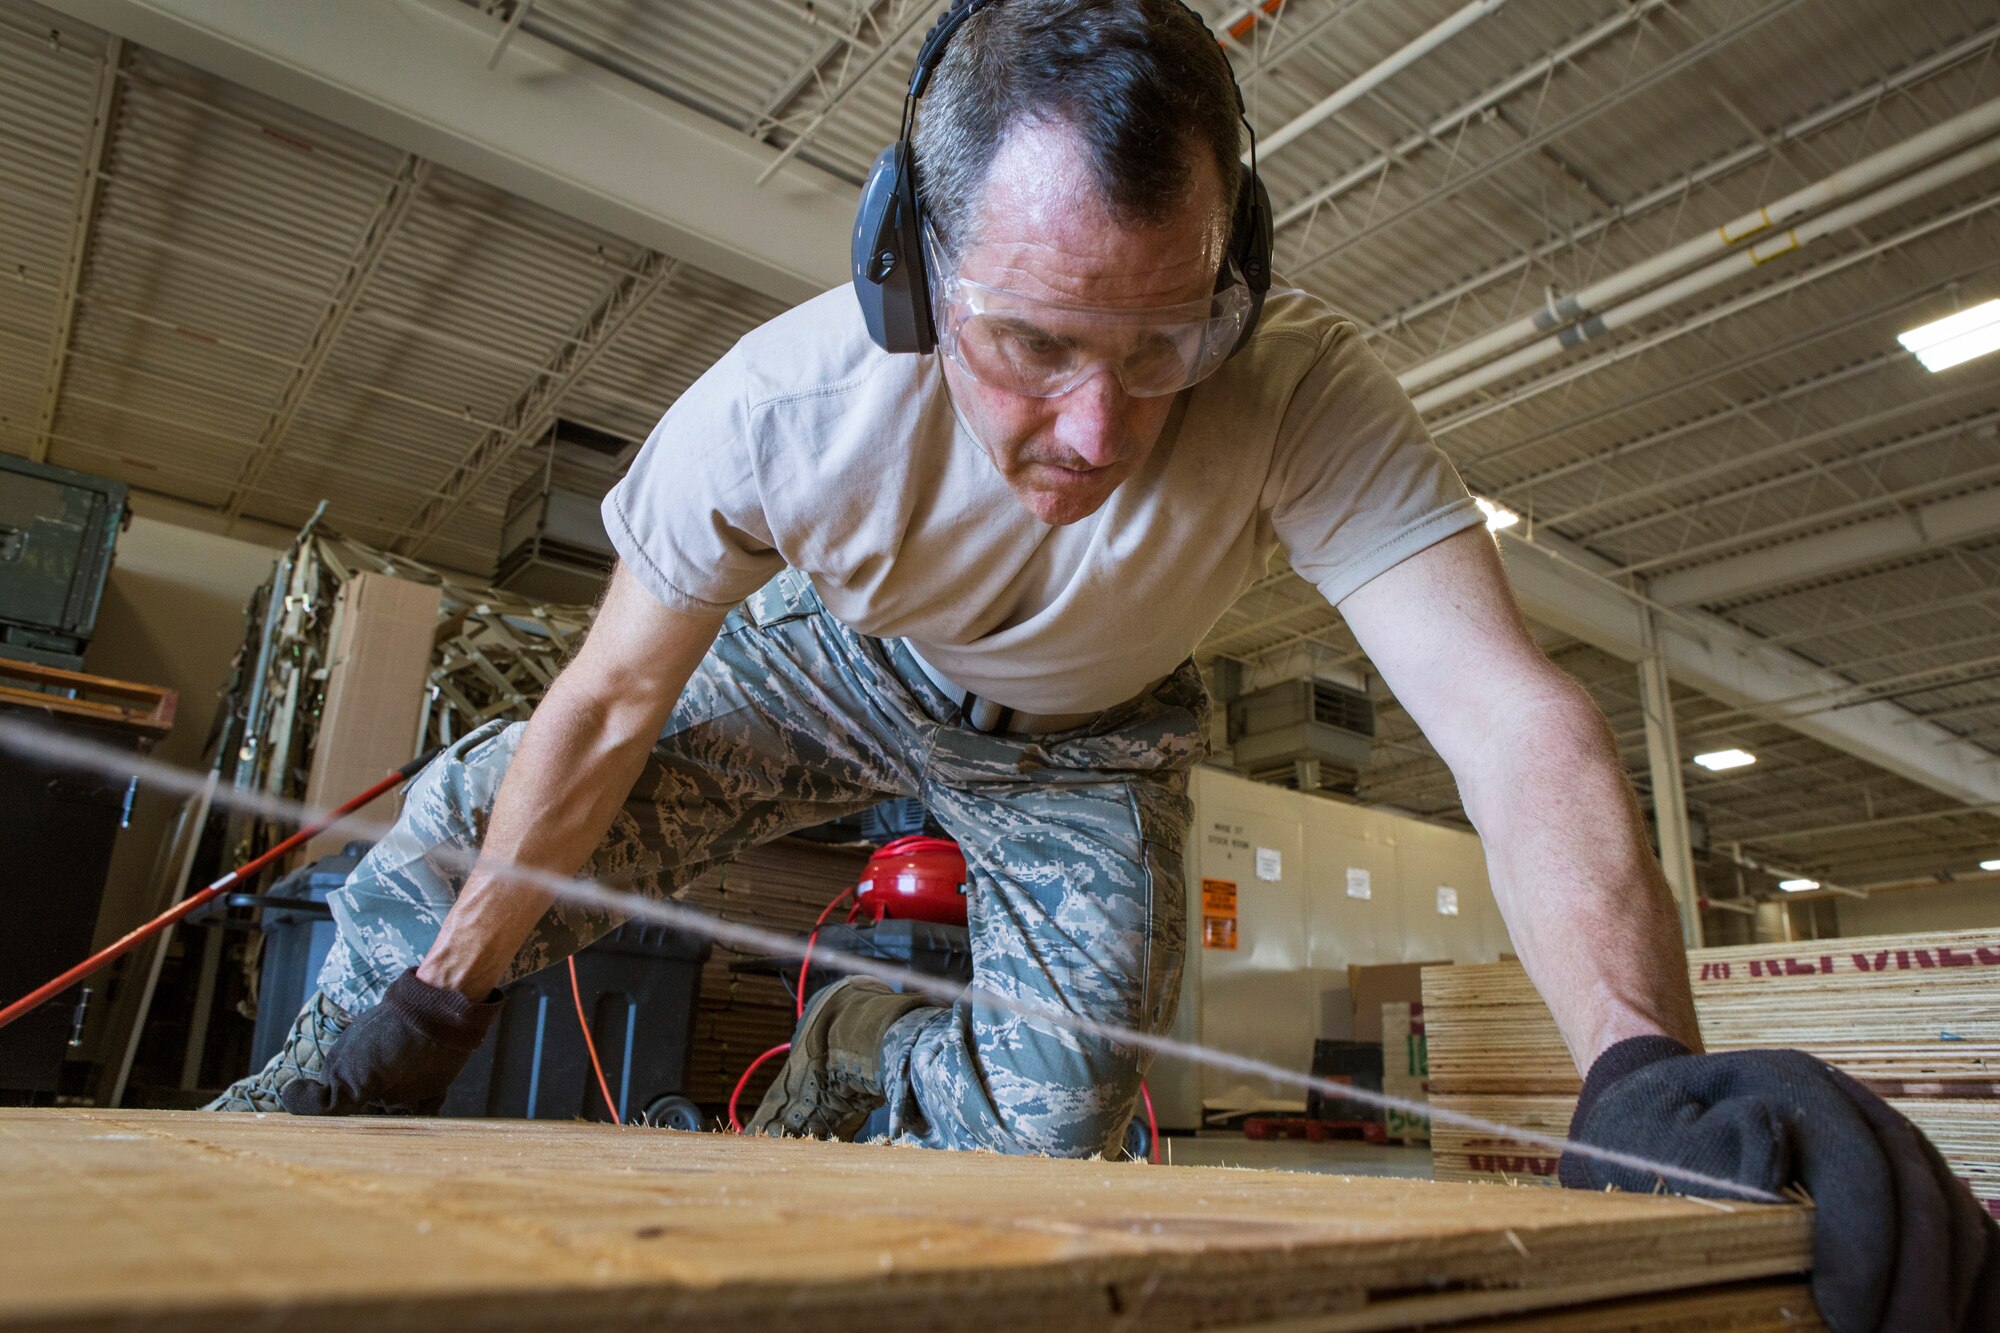 Master Sgt. Patrick J. Applegate, 108th Wing Traffic Management Office, New Jersey Air National Guard, positions a piece of plywood prior to nailing it for a shoring ramp that will be used to load a 1982 Mack 1250 GPM pumper fire truck on to a C-5 Galaxy at Joint Base McGuire-Dix-Lakehurst, N.J., June 30, 2016. The fire truck is being donated to a group of volunteer firefighters in Managua, Nicaragua through the Denton Program, which allows U.S. citizens and organizations to use space available on military cargo aircraft to transport humanitarian goods to countries in need. (U.S. Air National Guard photo by Master Sgt. Mark C. Olsen/Released)